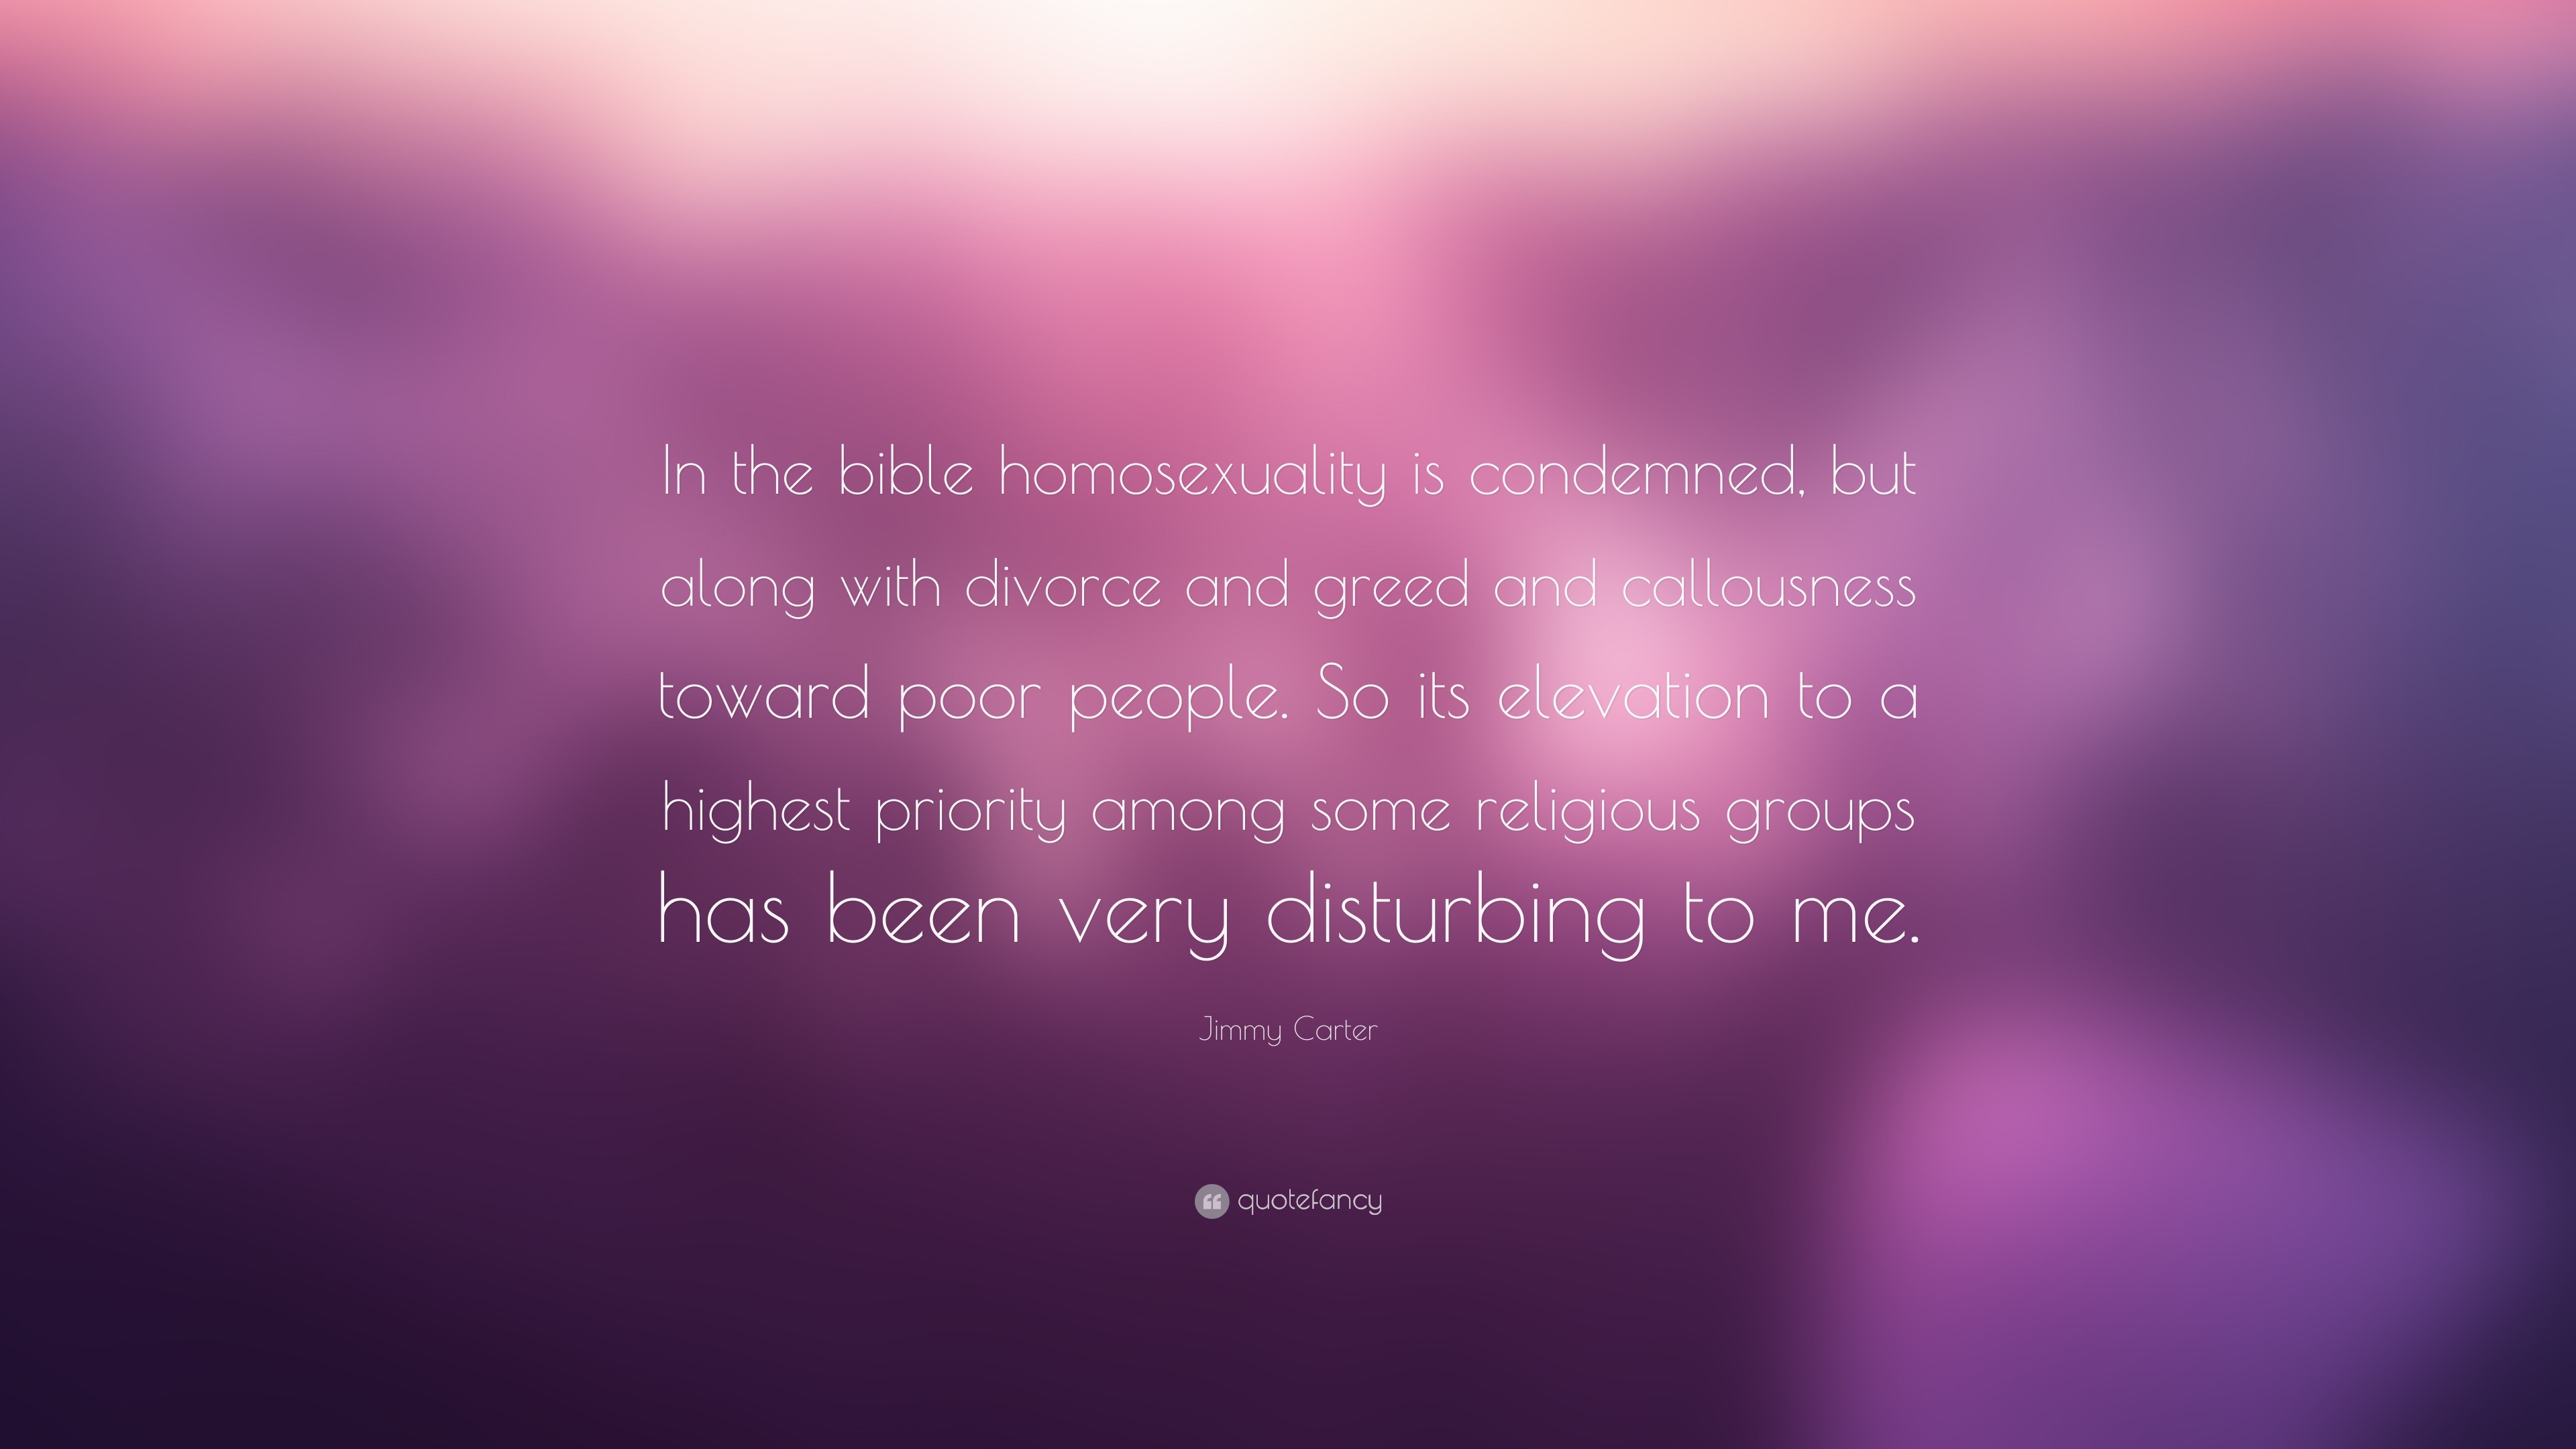 Jimmy Carter Quote: “In the bible homosexuality is condemned, but along ...